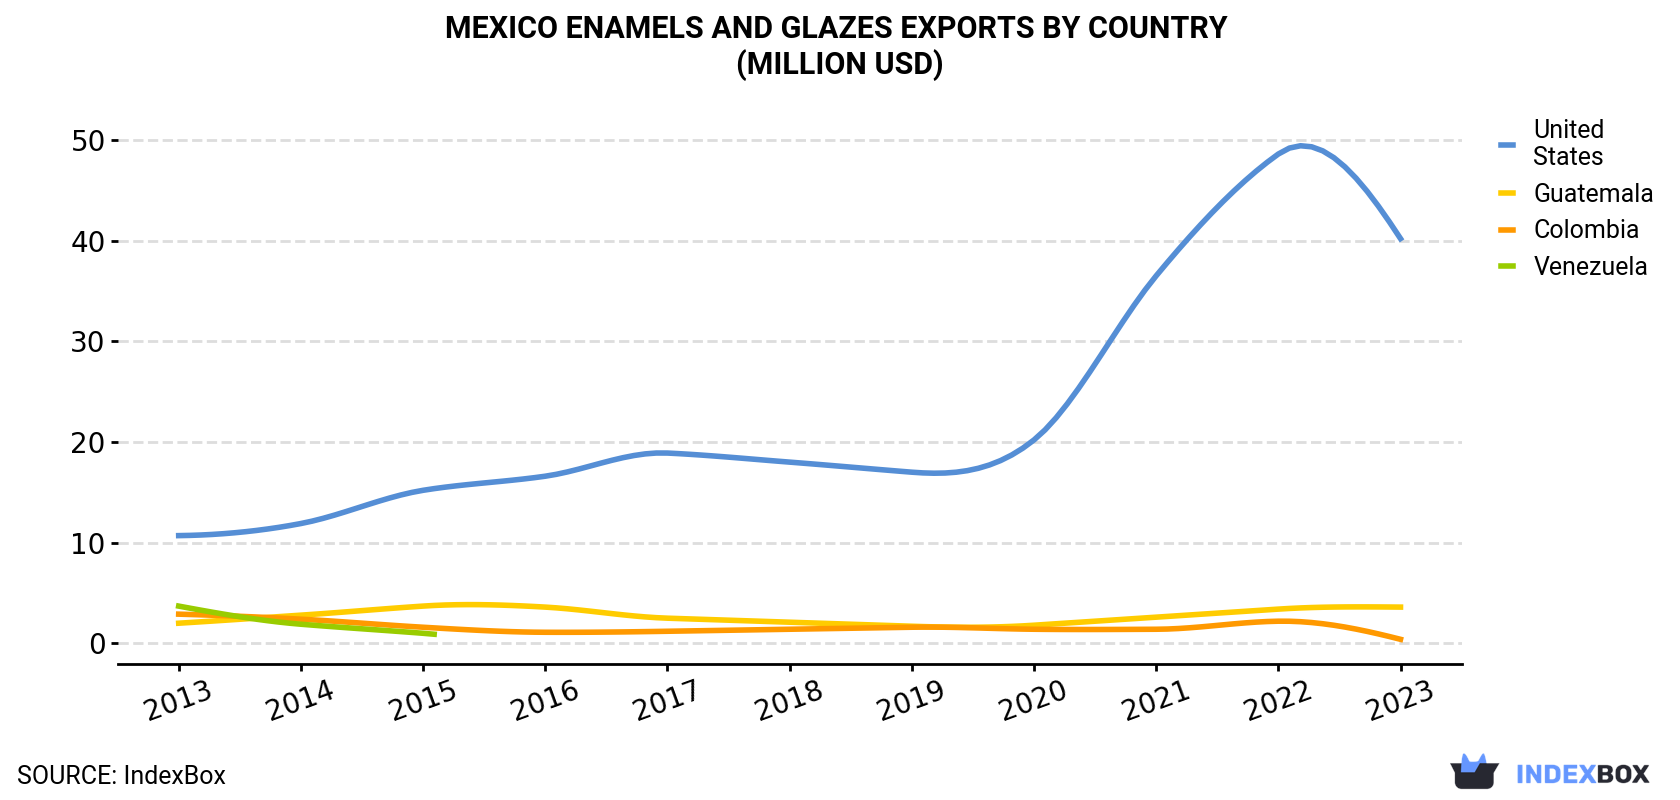 Mexico Enamels And Glazes Exports By Country (Million USD)